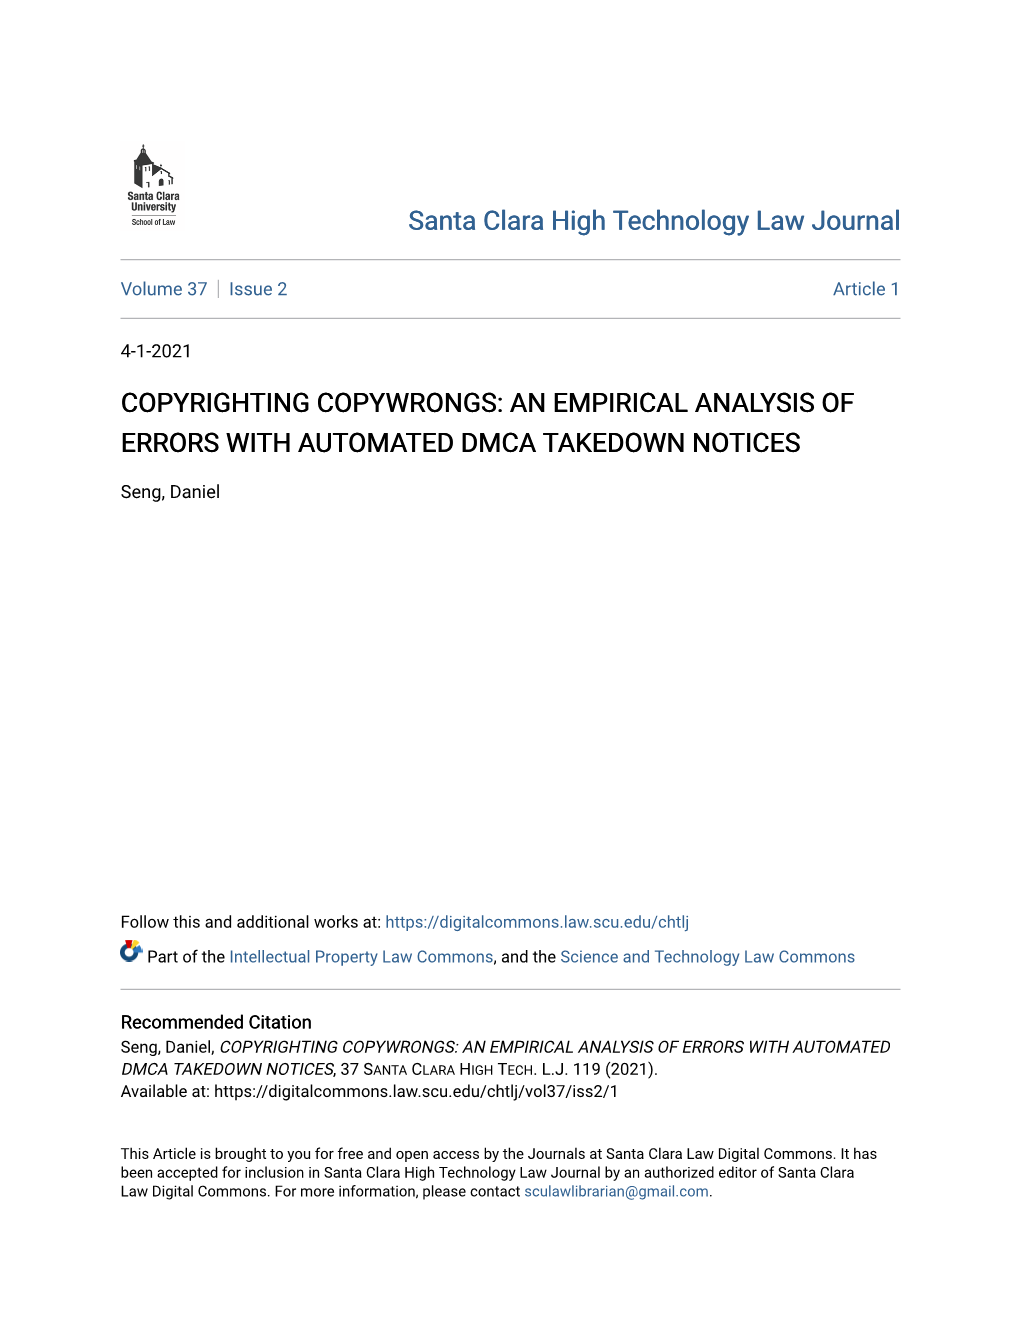 An Empirical Analysis of Errors with Automated Dmca Takedown Notices